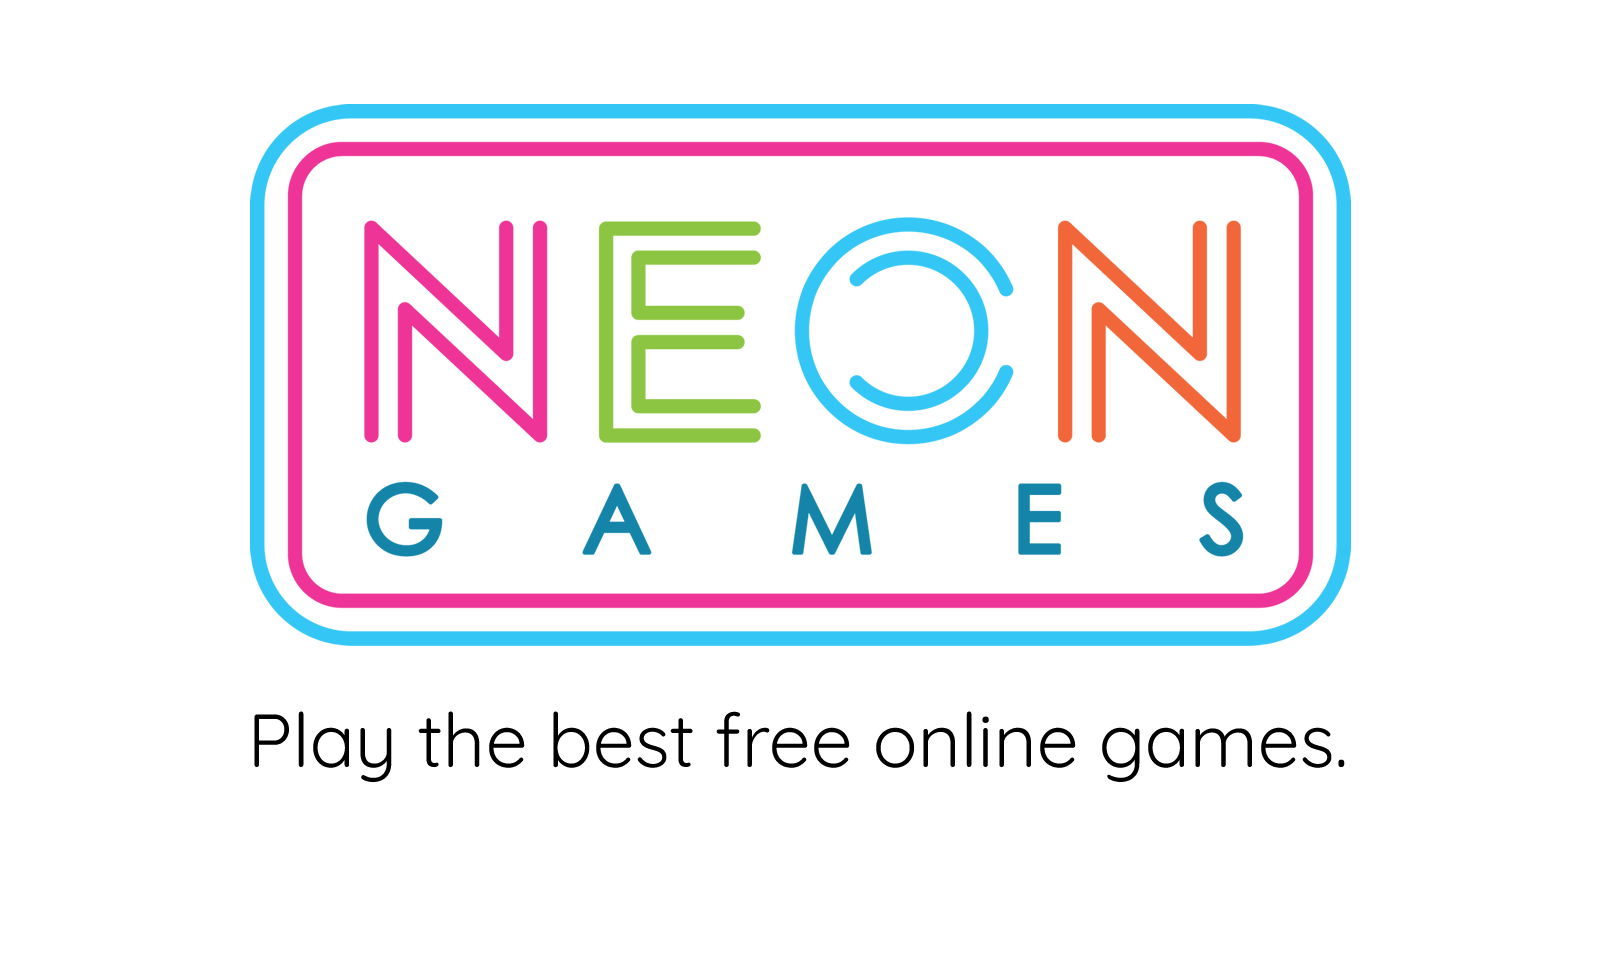 1 Player Games - Play 1 Player Games on Free Online Games